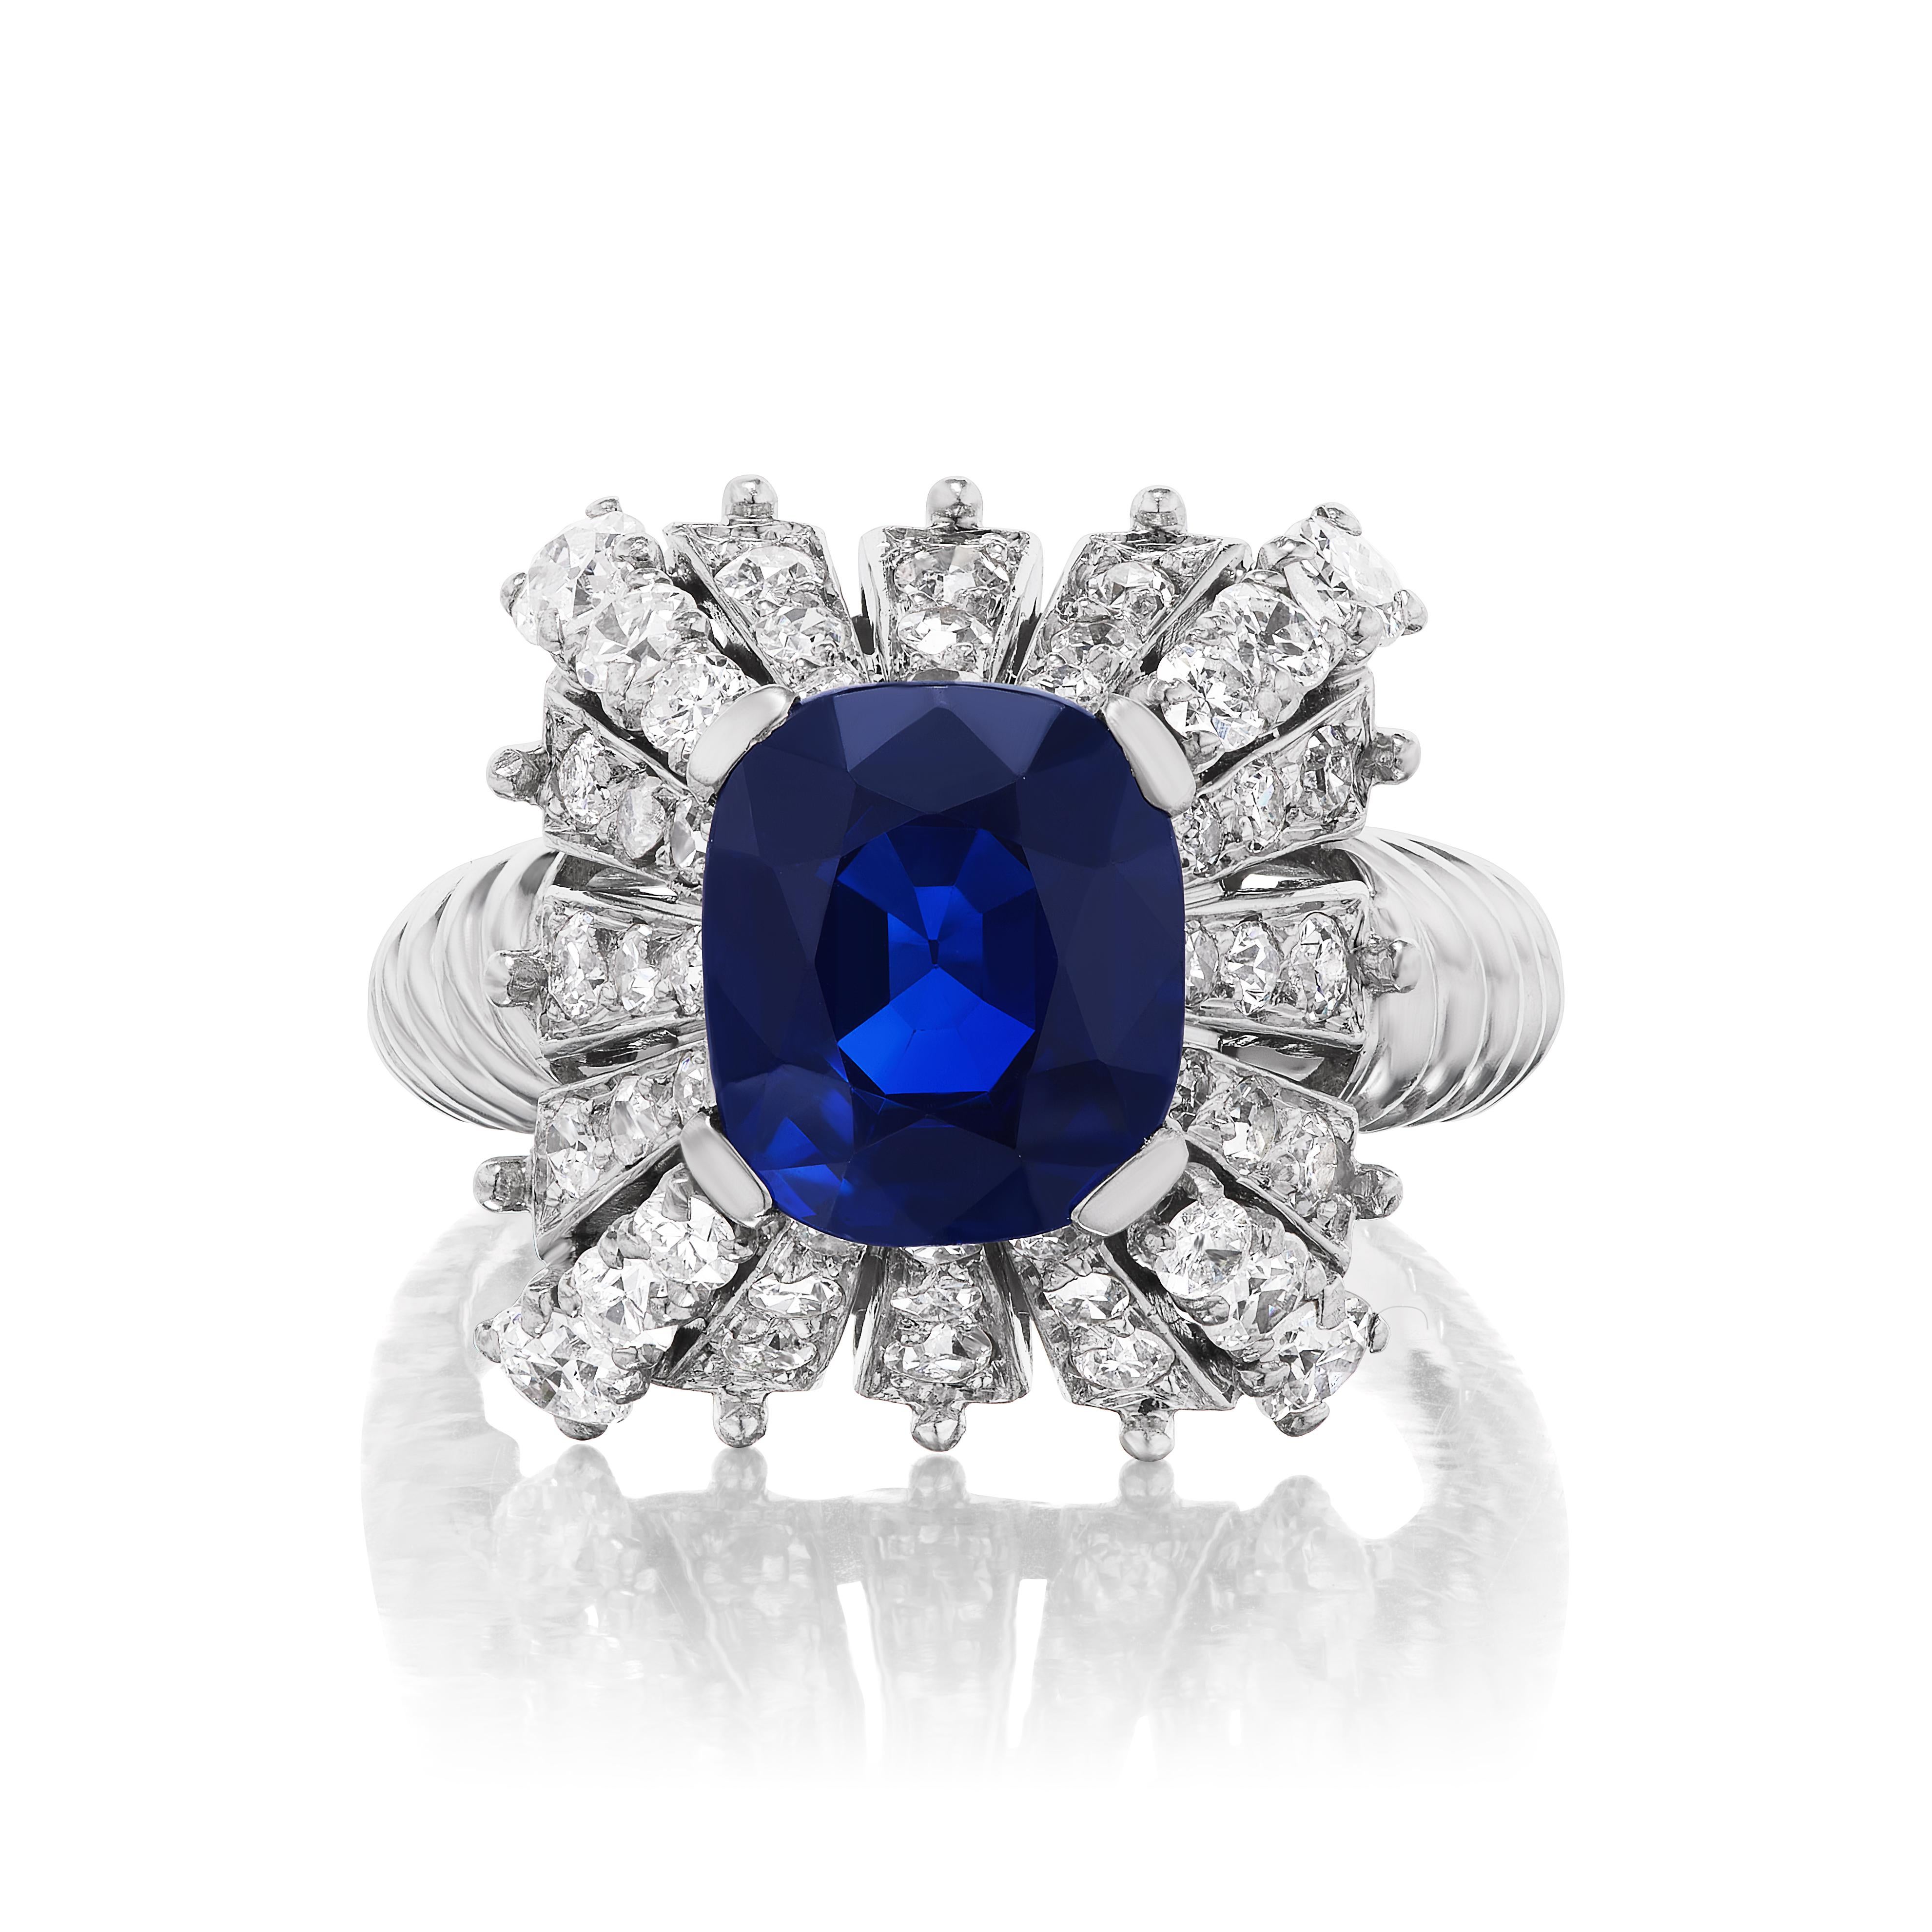 This exquisitely designed Art Deco period ring features a 3.47ct cushion-cut unheated Thai sapphire of excellent color and clarity. The stone is superb and is further accentuated by 48 single cut diamonds weighing approximately 2.00 carats laid out